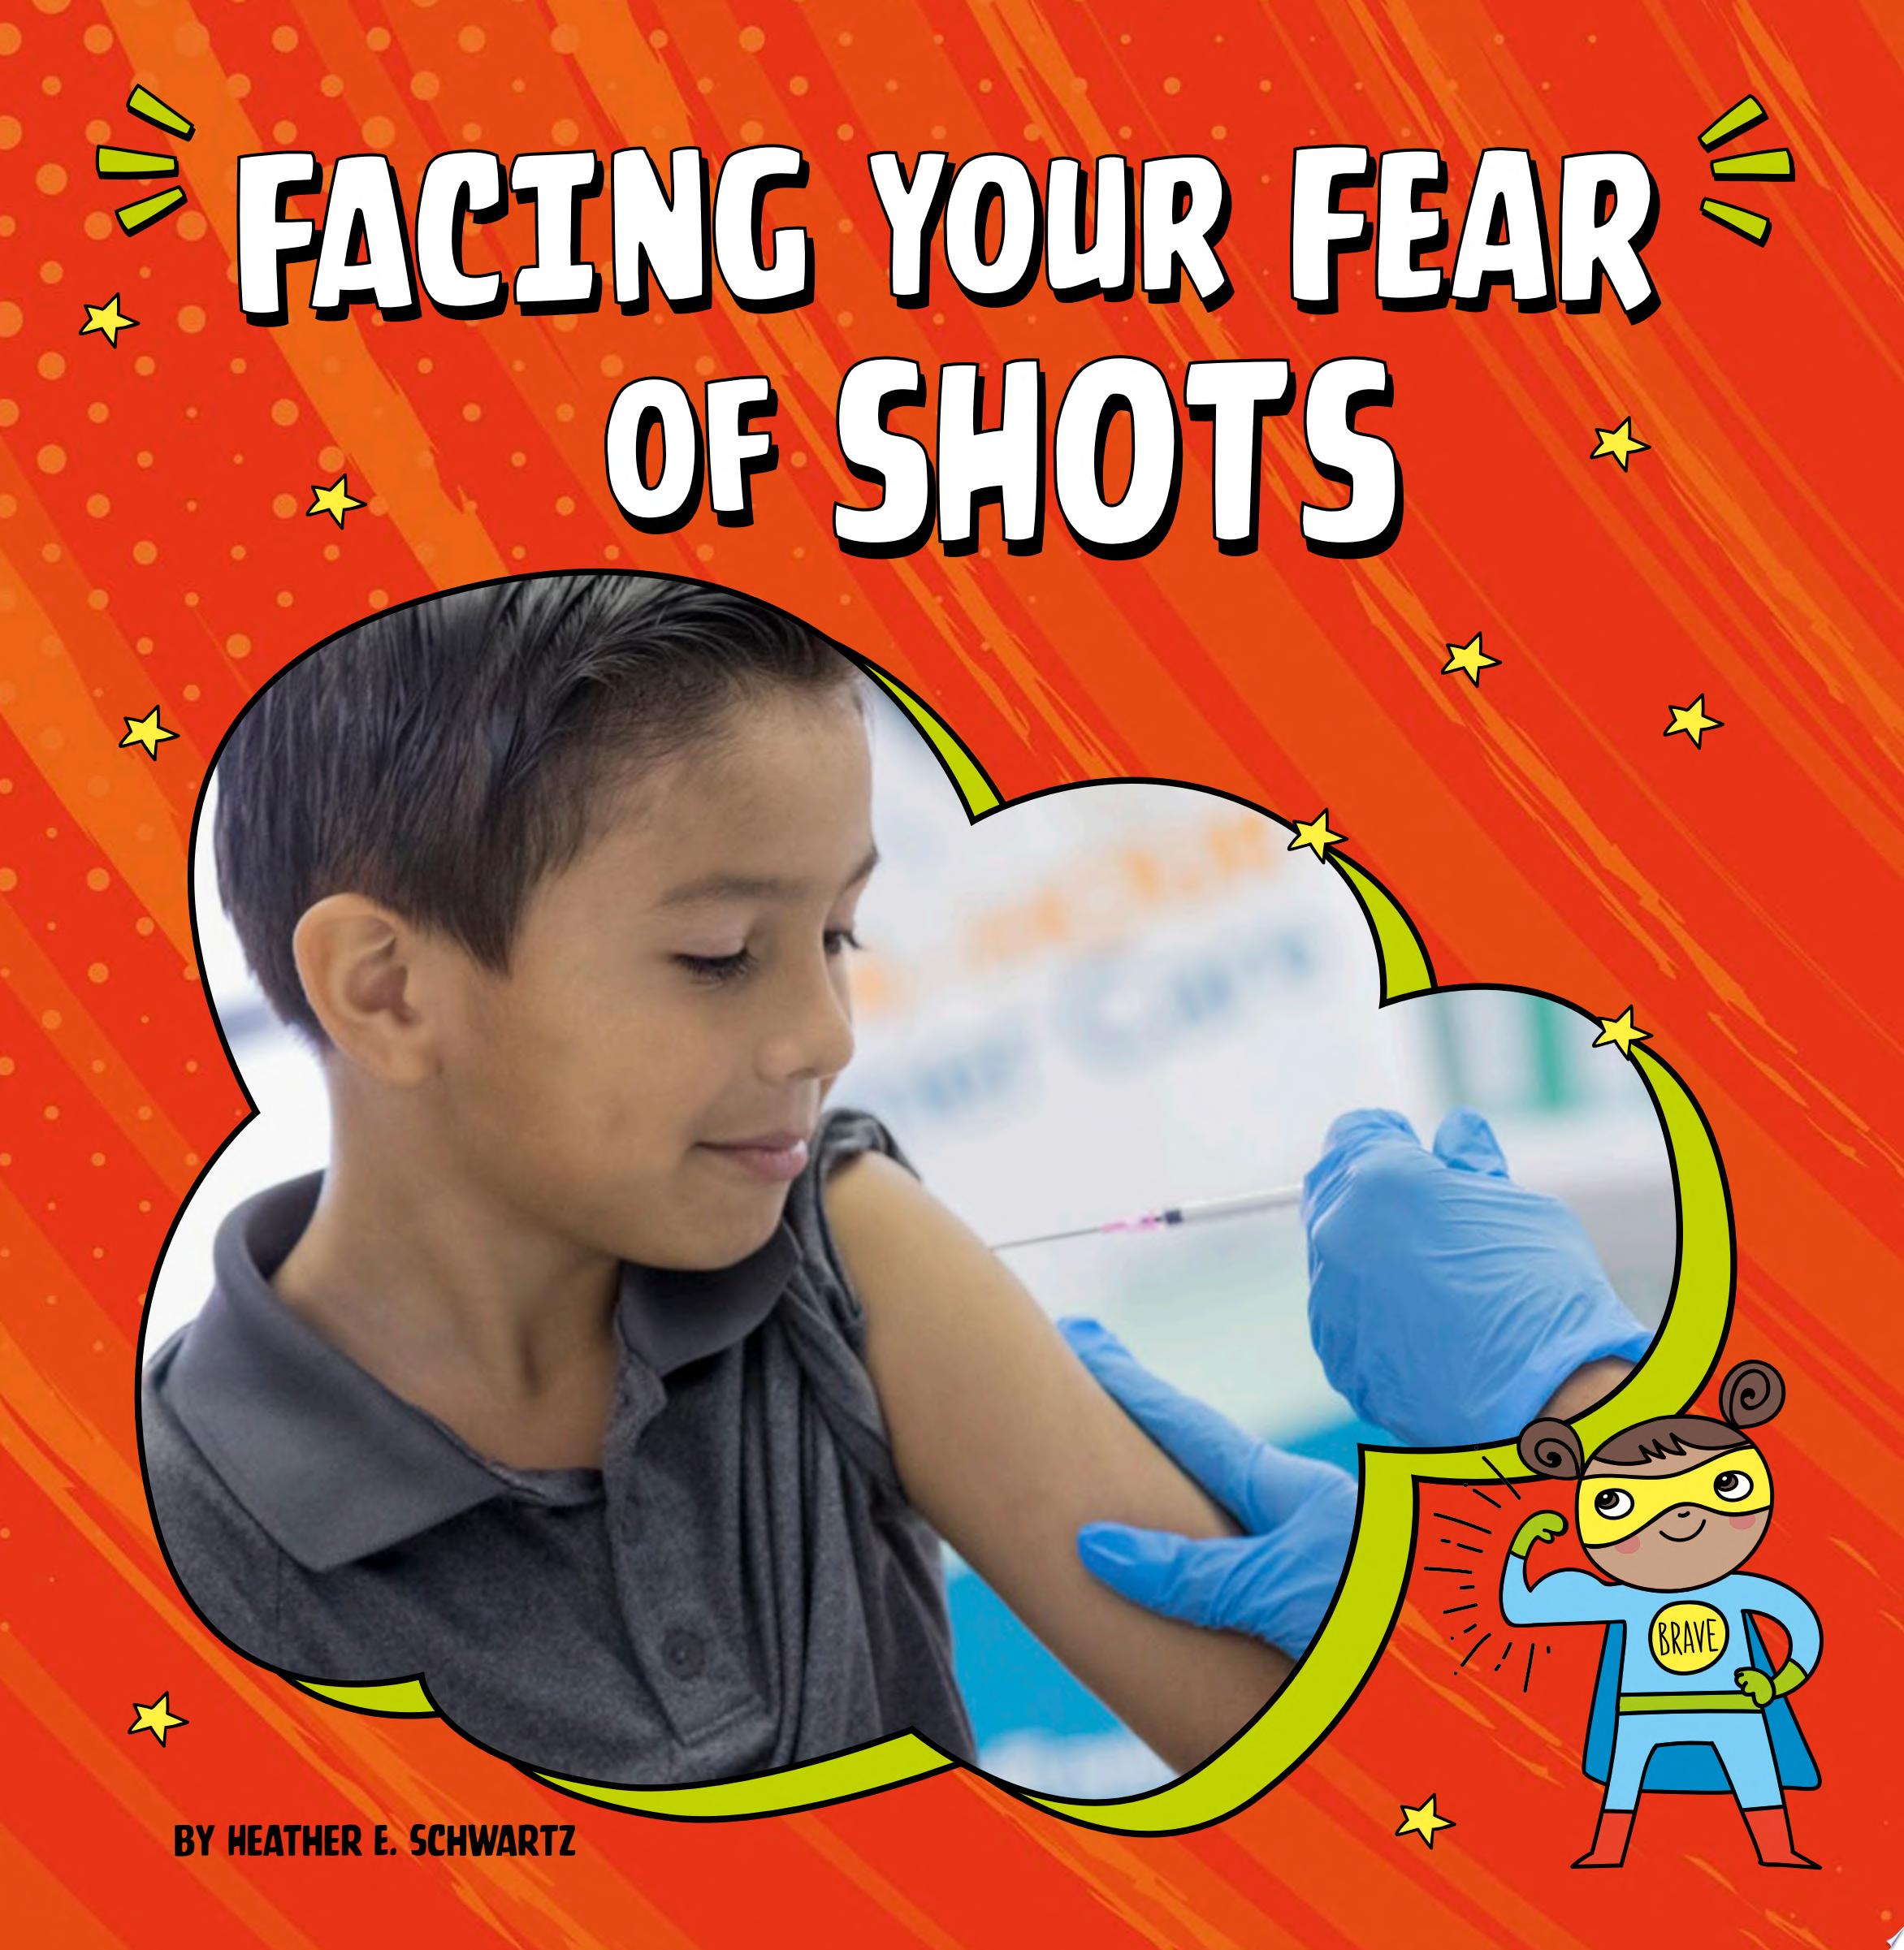 Image for "Facing Your Fear of Shots"